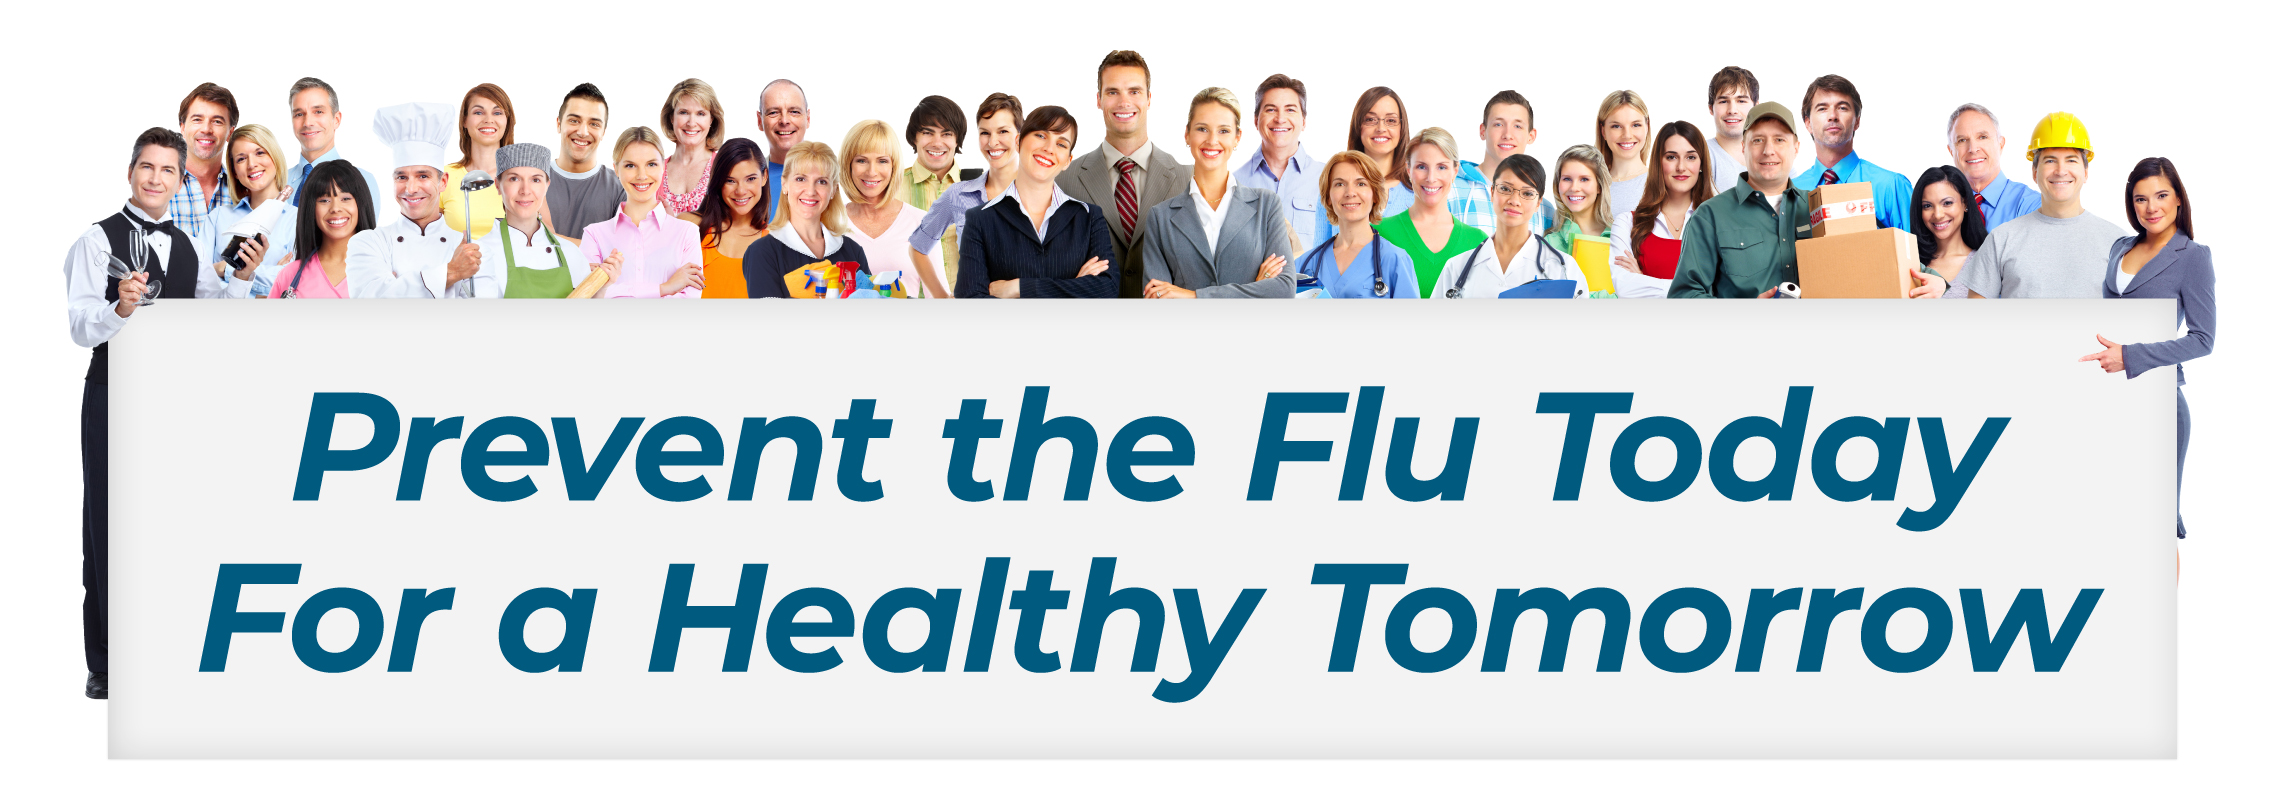 Prevent the Flu Today for a Healthy Tomorrow